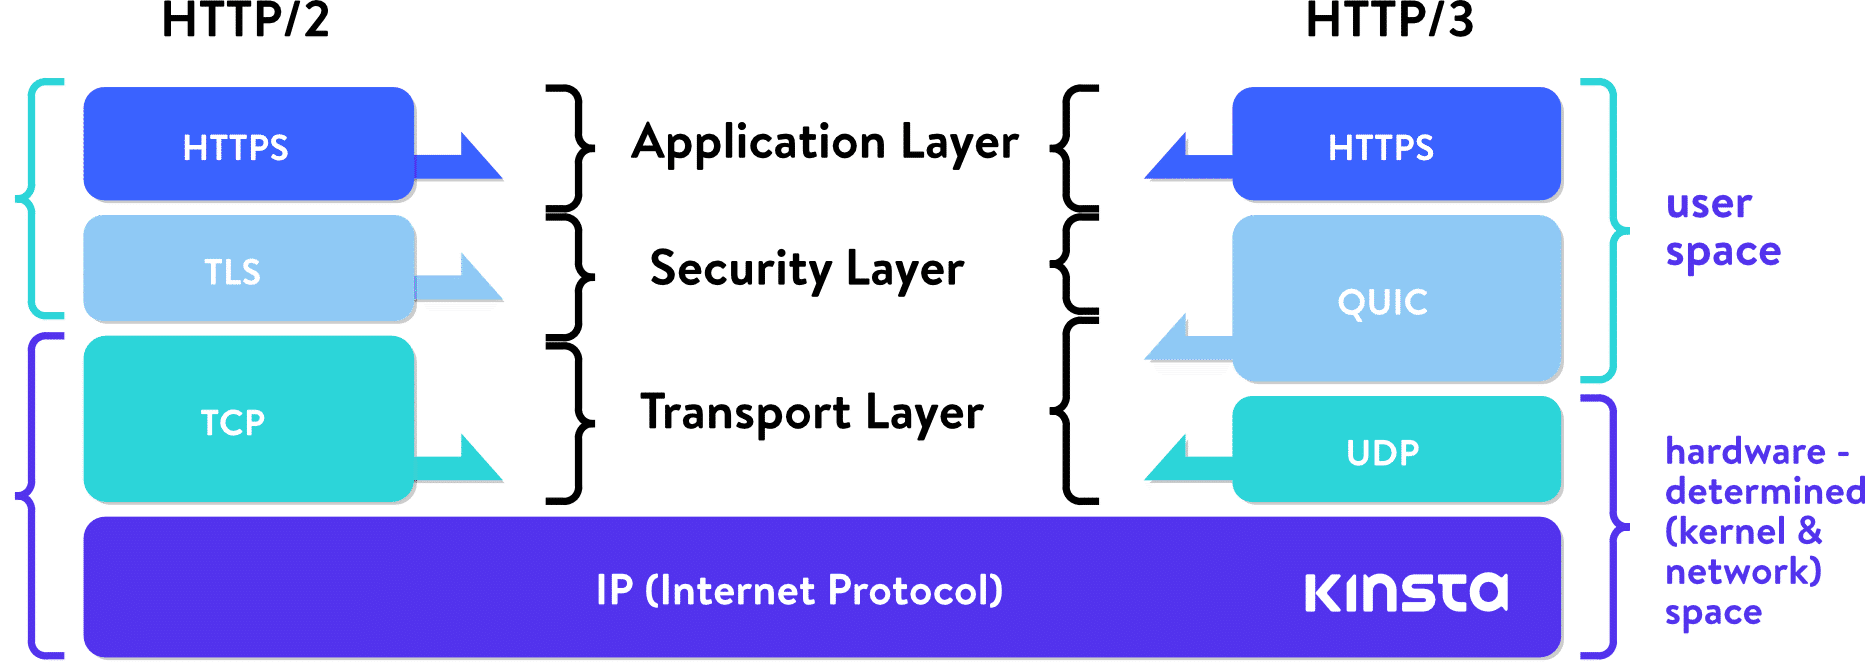 HTTP / 2 stack vs HTTP / 3 stack